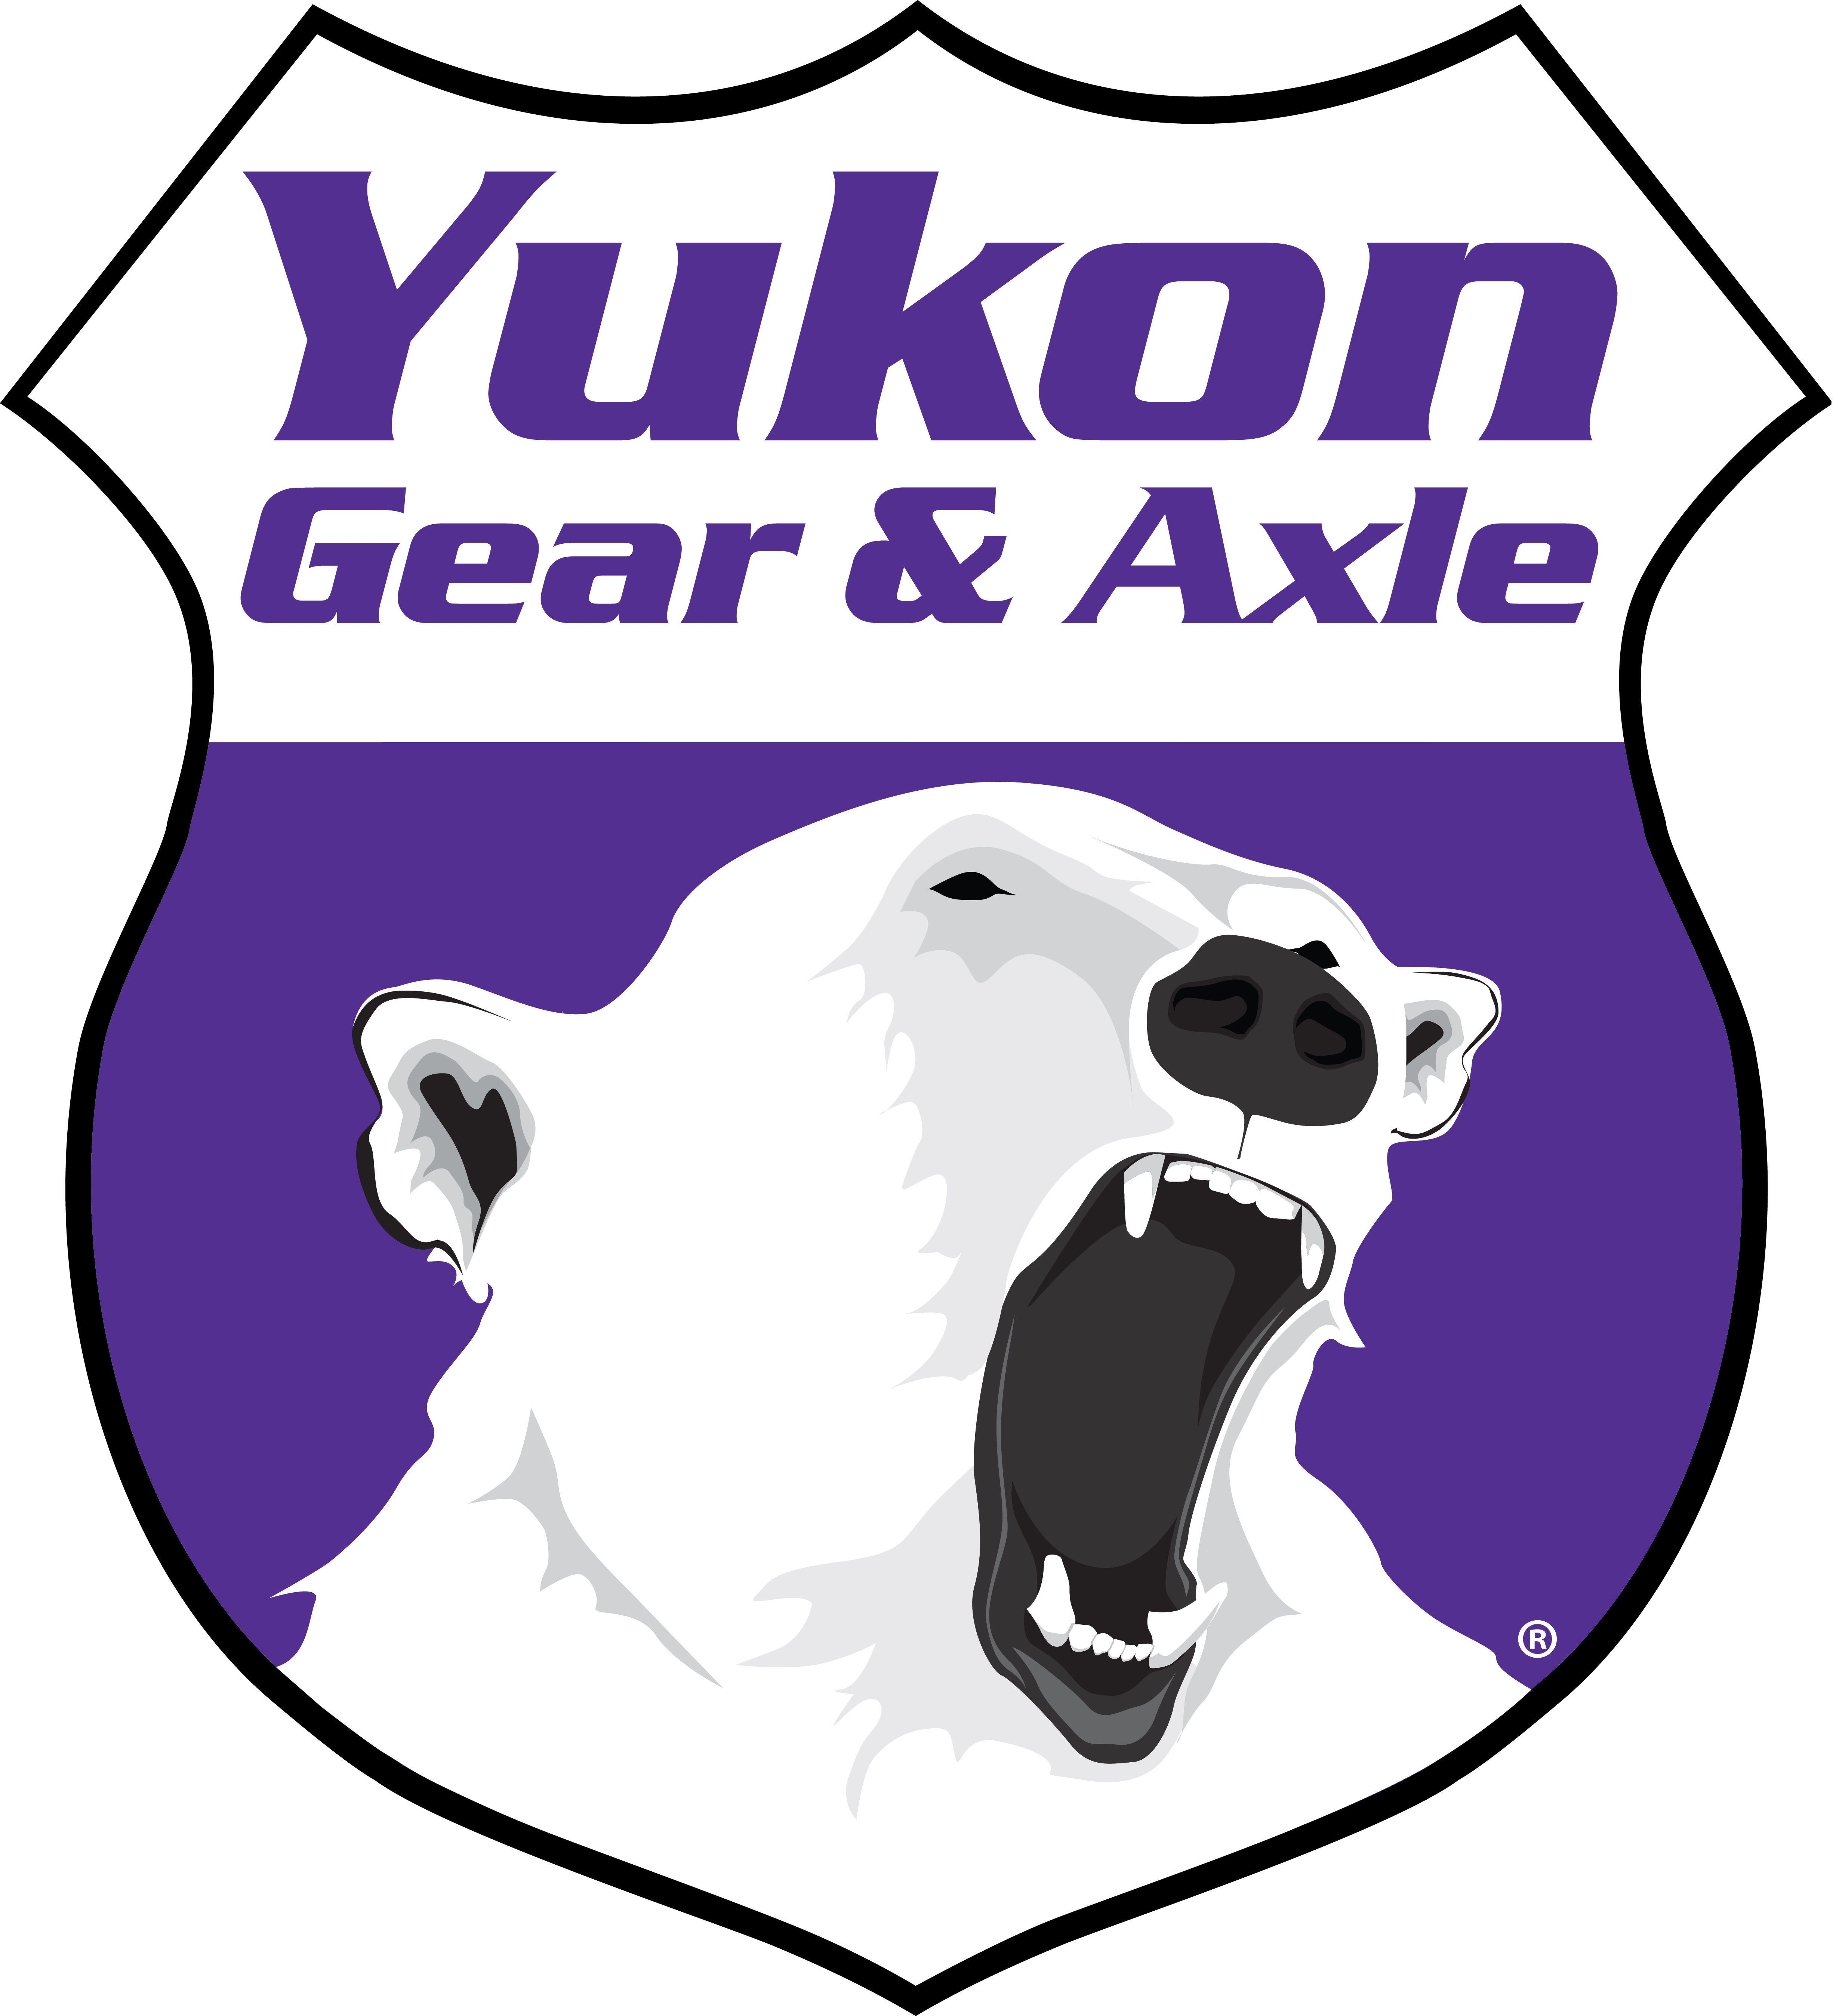 Yukon Master Overhaul kit for Dana 44 IFS differential for '92 and older